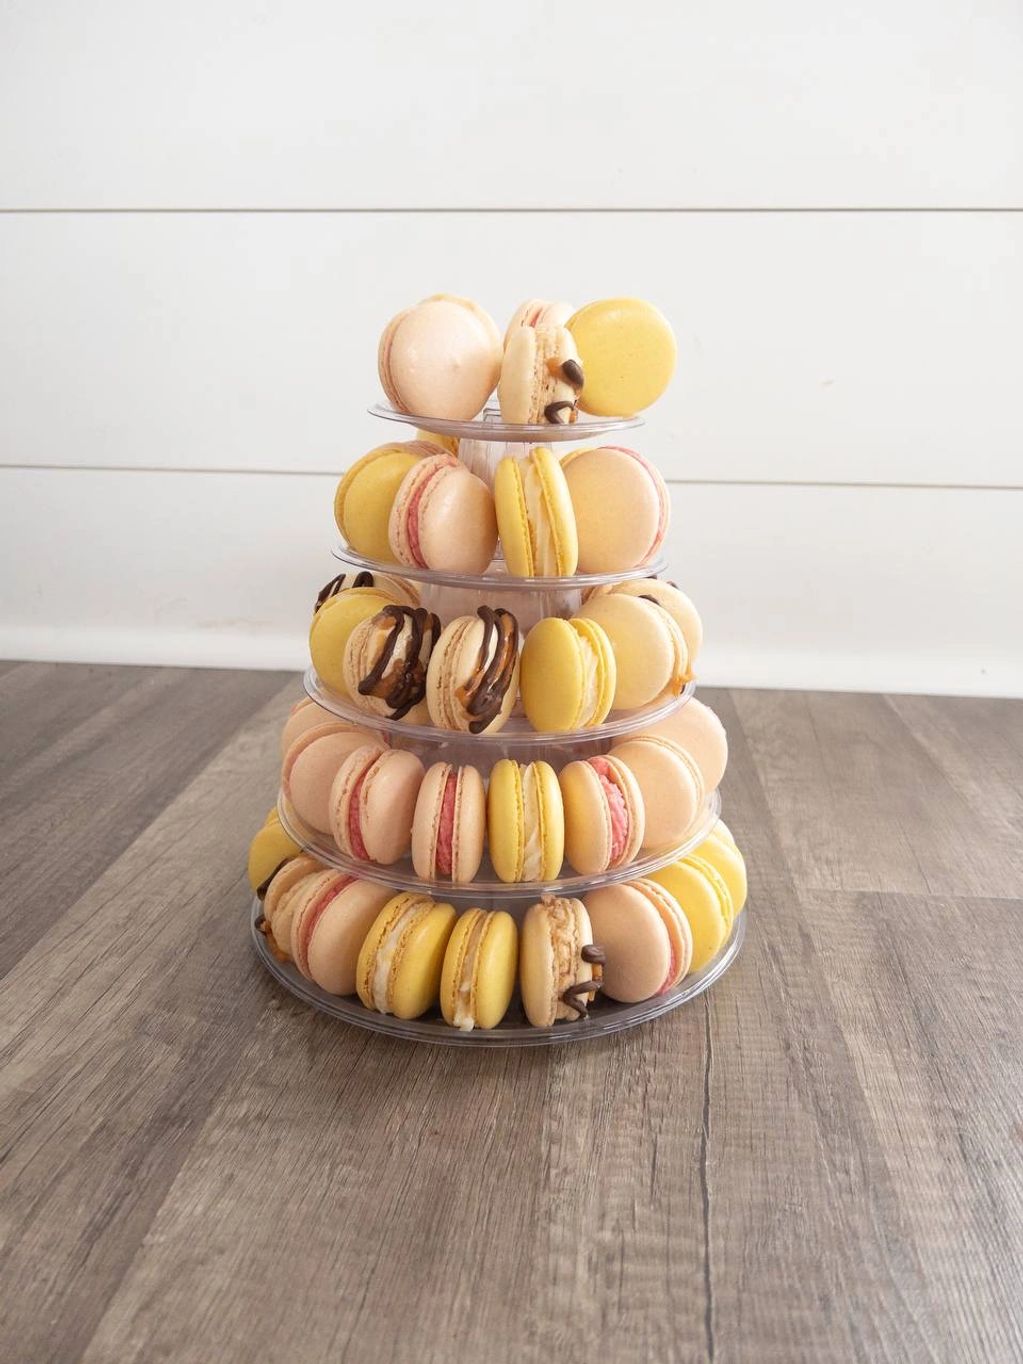 Tier of macarons perfect for special occasions. Here are salted caramel,lemon and raspberry macarons